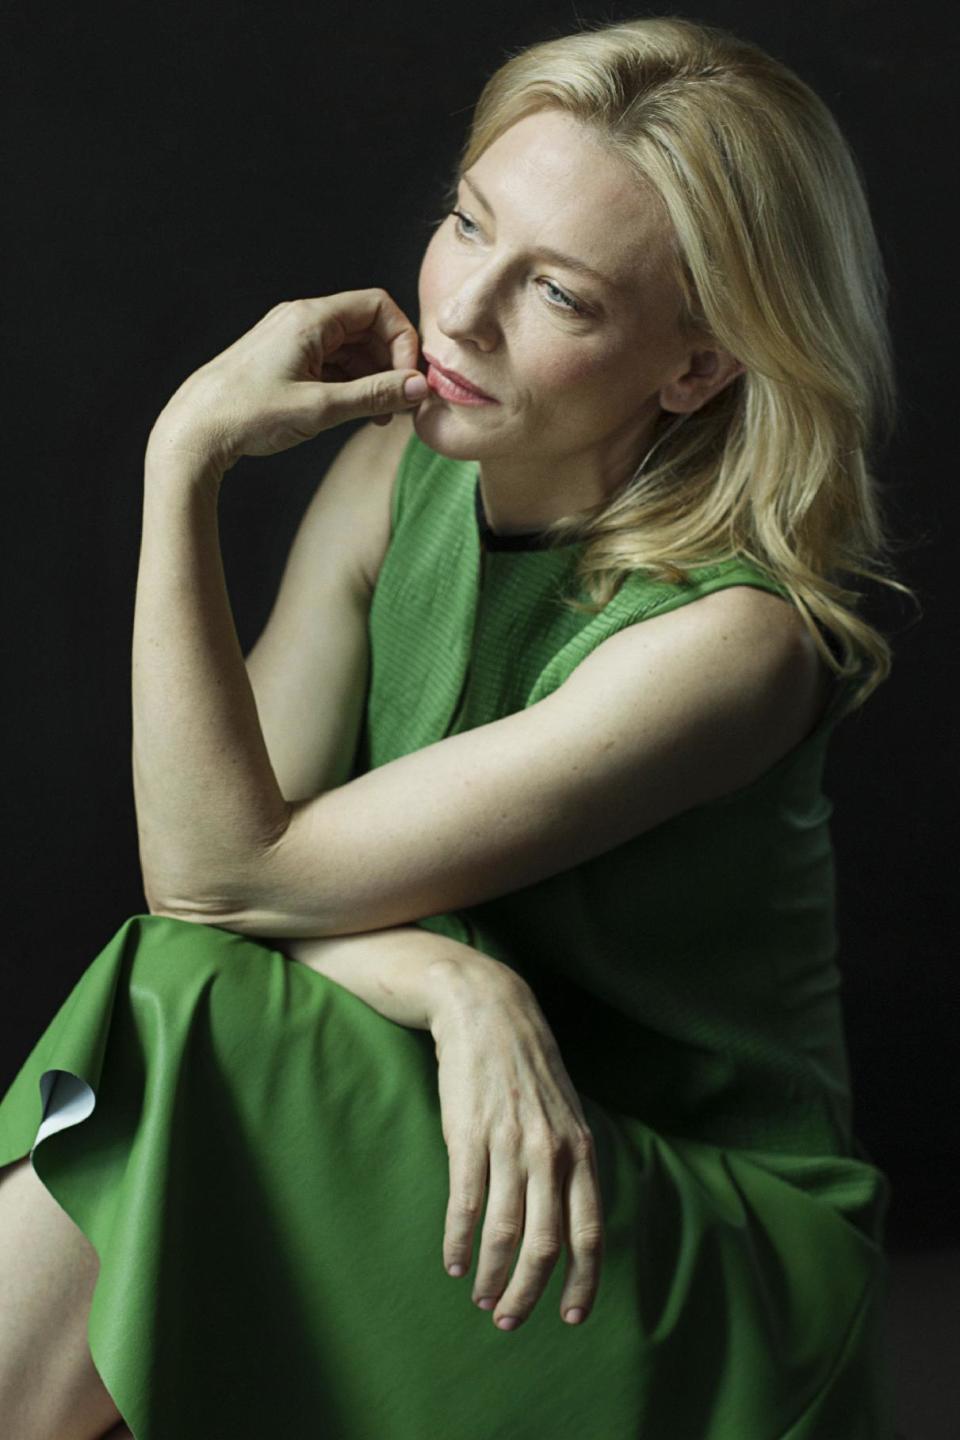 This July 23, 2013 photo shows Australian actress Cate Blanchett, star of the Woody Allen film, "Blue Jasmine," in New York. The film opens nationwide on July 26. (Photo by Victoria Will/Invision/AP)